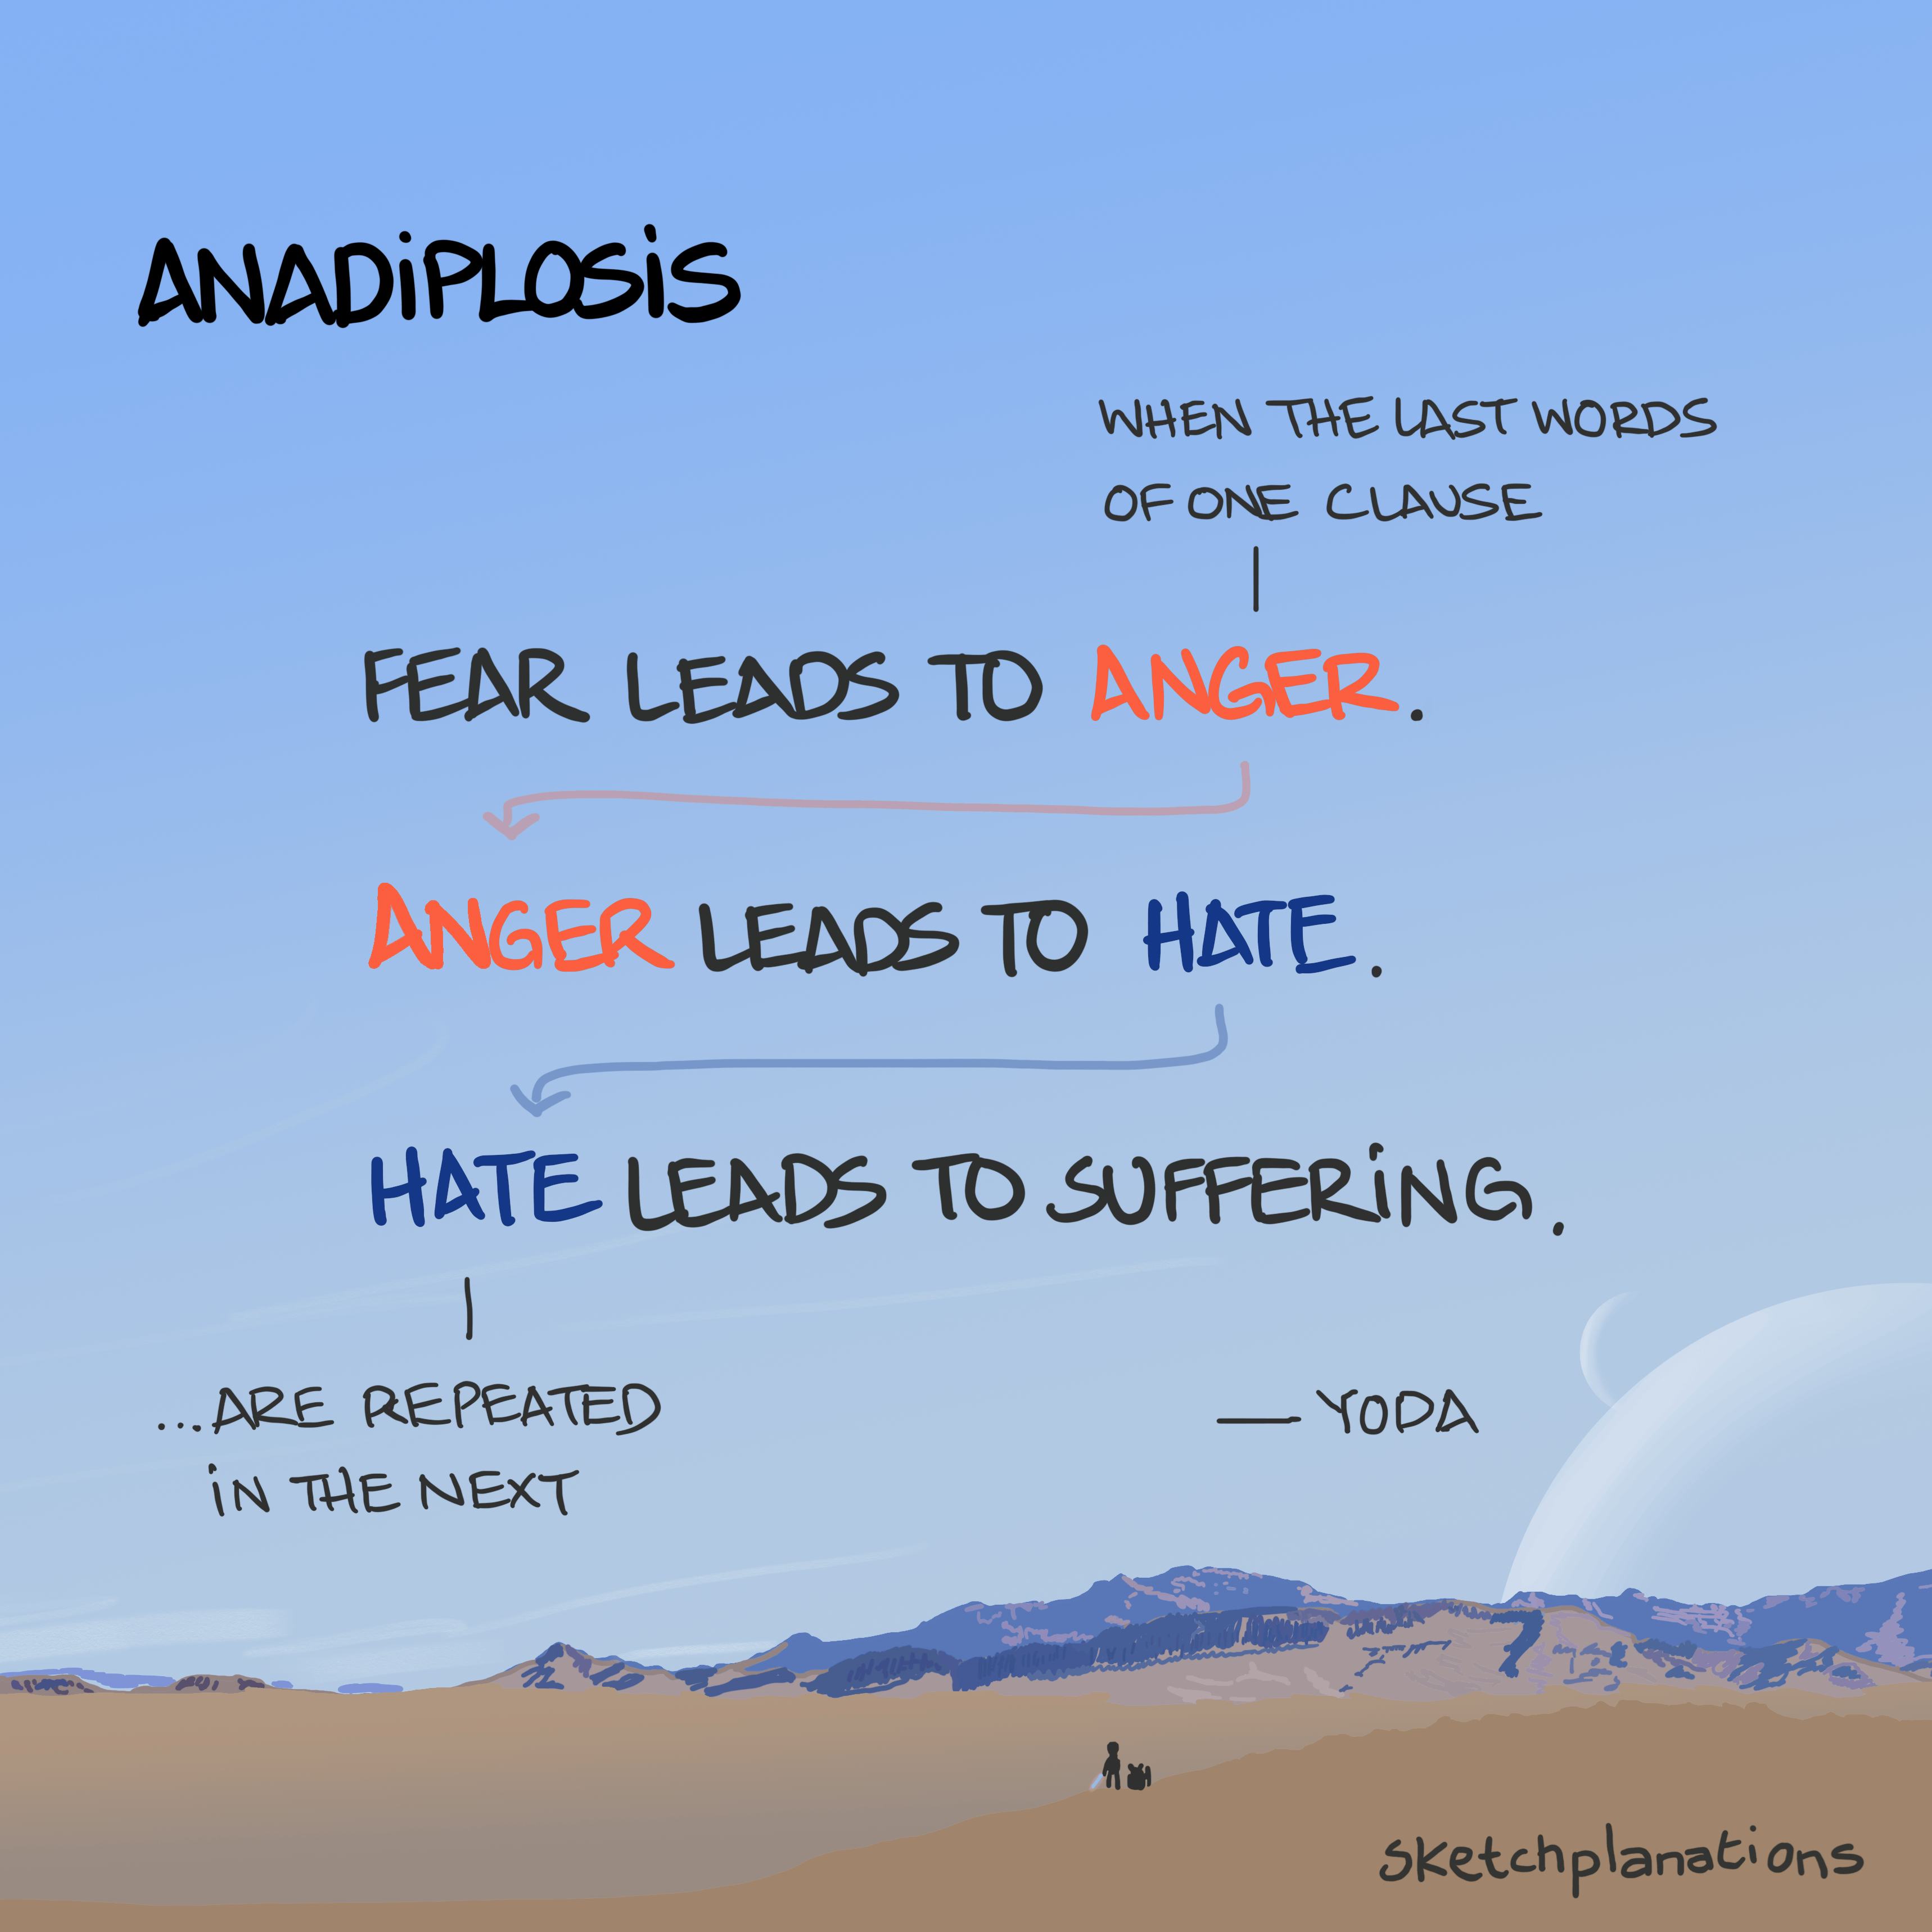 Anadiplosis illustration. Yoda speaks his famous lines: Fear leads to anger. Anger leads to hate. Hate leads to suffering—on a dusty desert planet with two moons